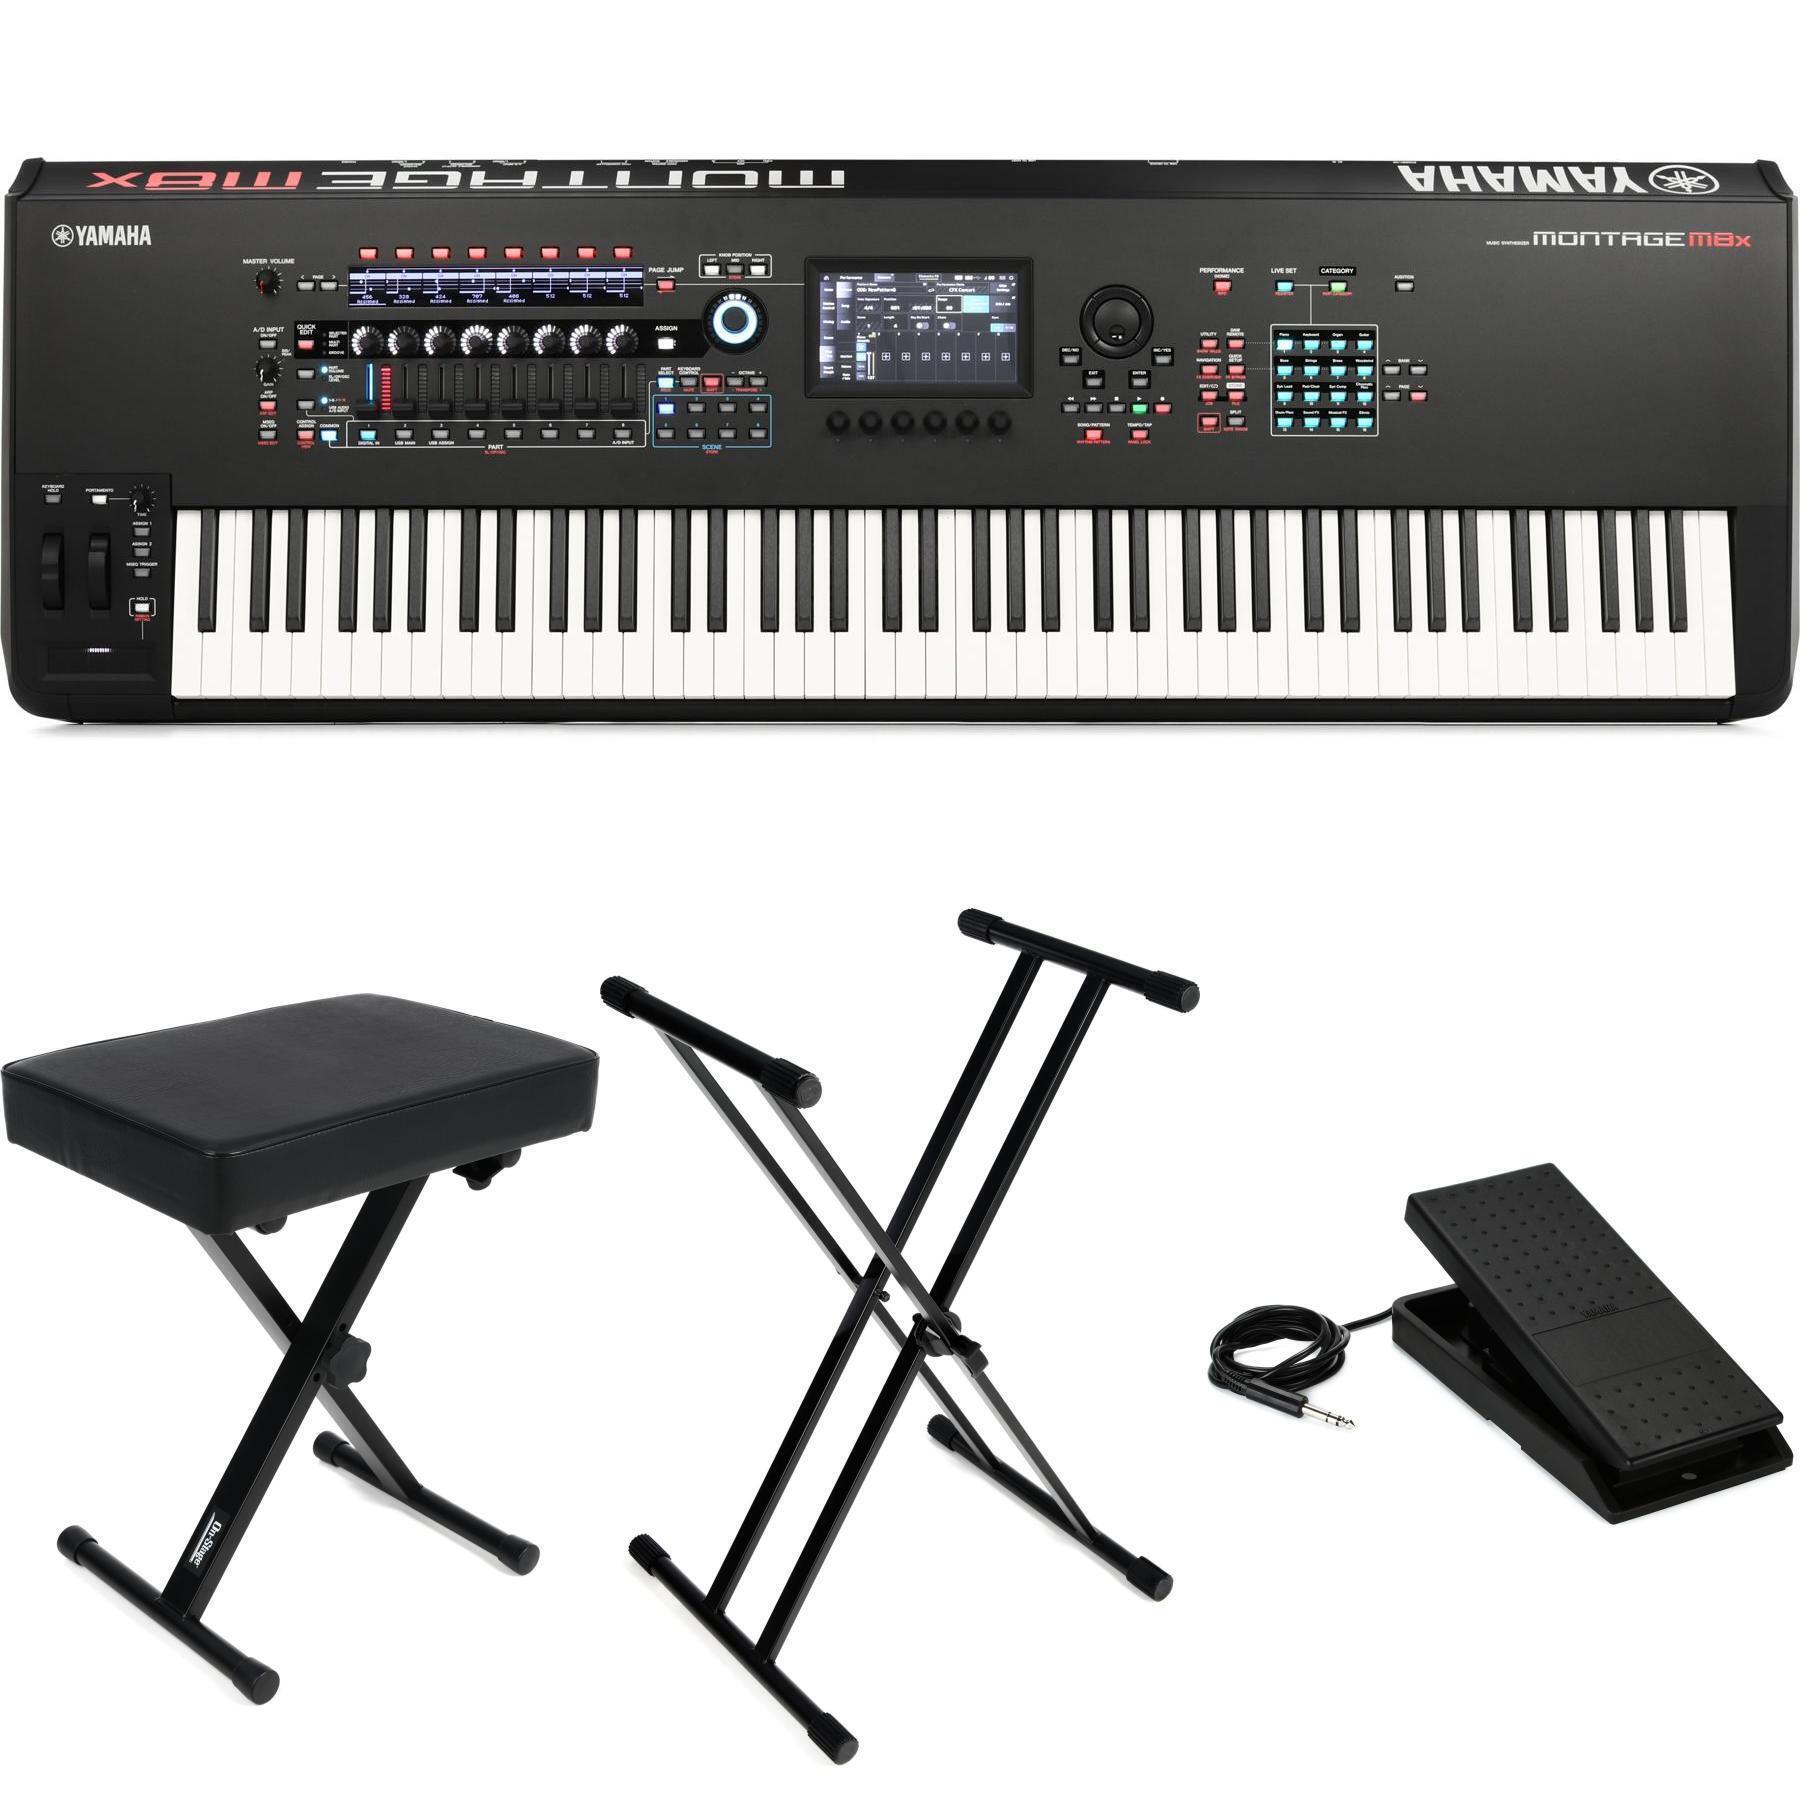 FC4 - Overview - Accessories - Synthesizers & Music Production Tools -  Products - Yamaha - United States